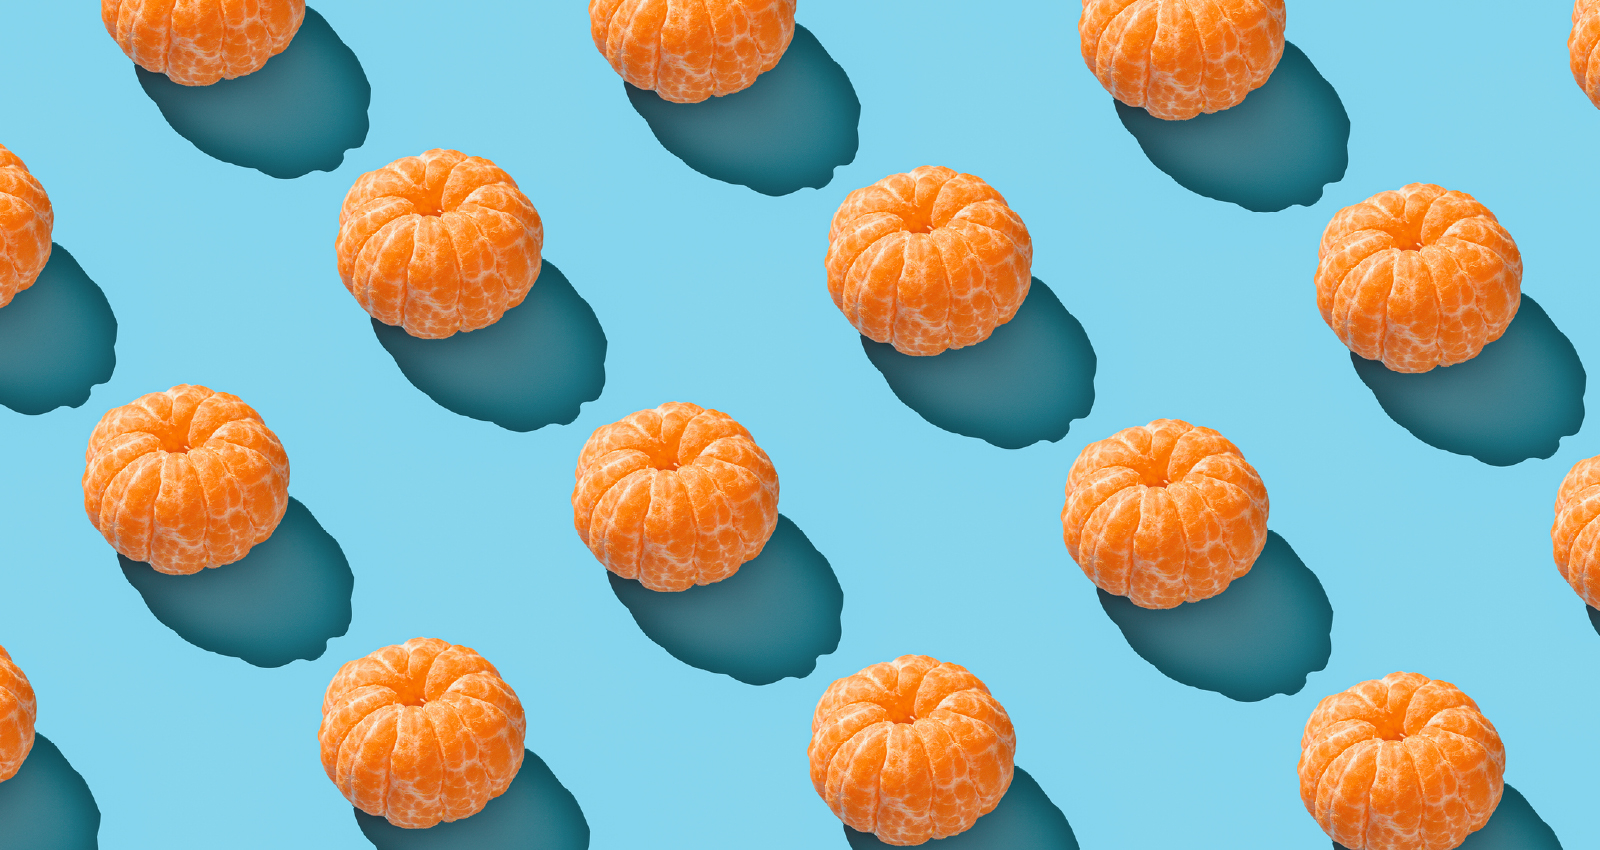 Image of peeled clementine grid on blue background